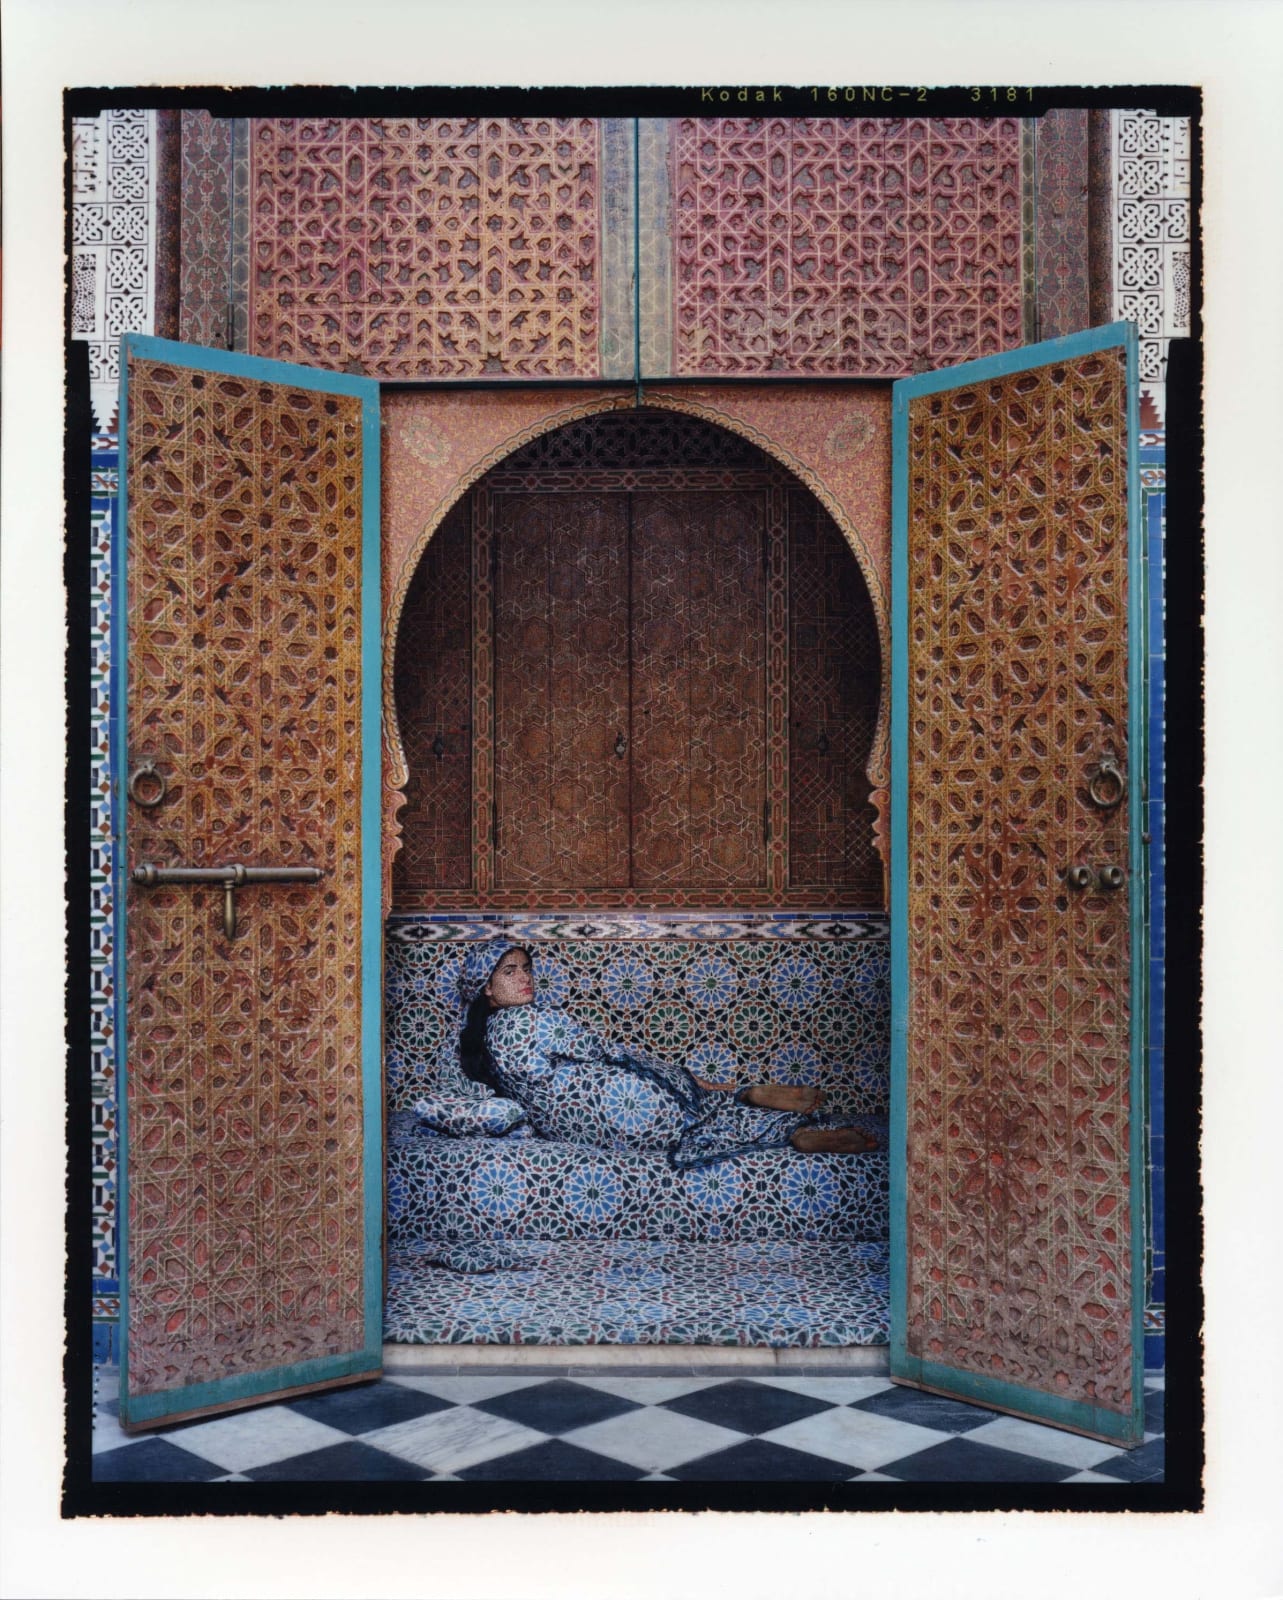 Woman reclining on divan in arched doorway, by Lalla Essaydi